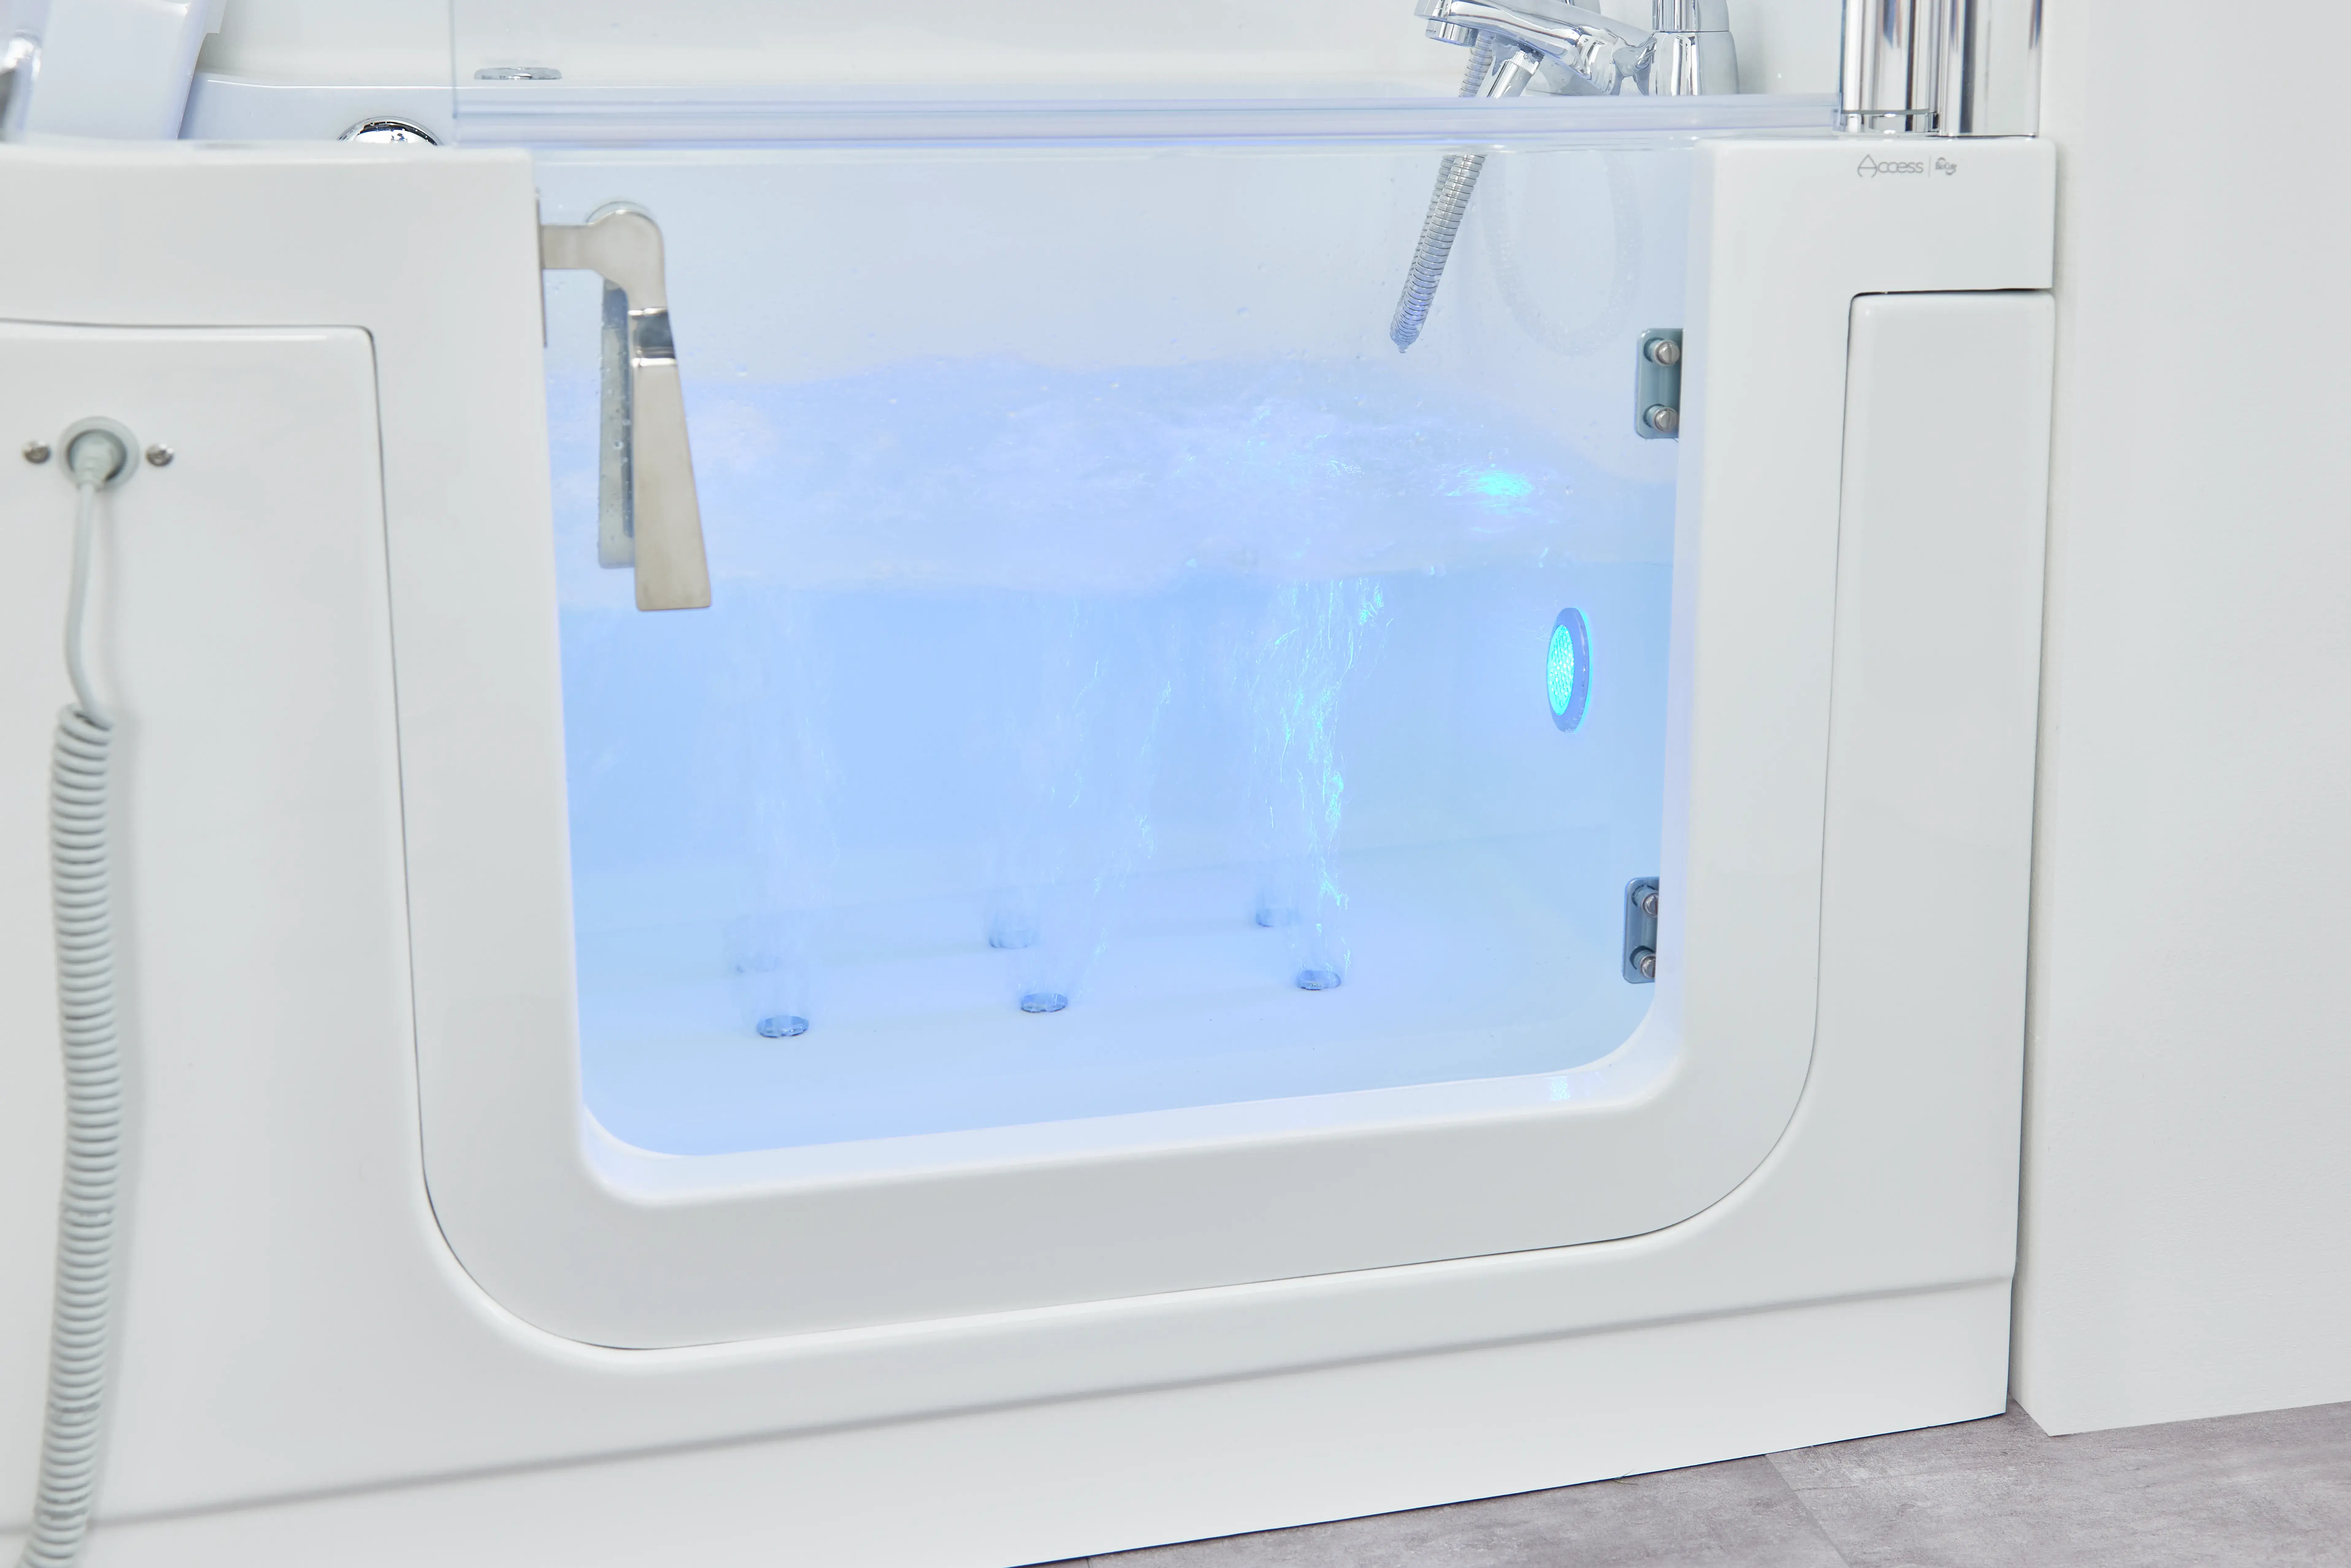 A white bath tub with a light inside of it.